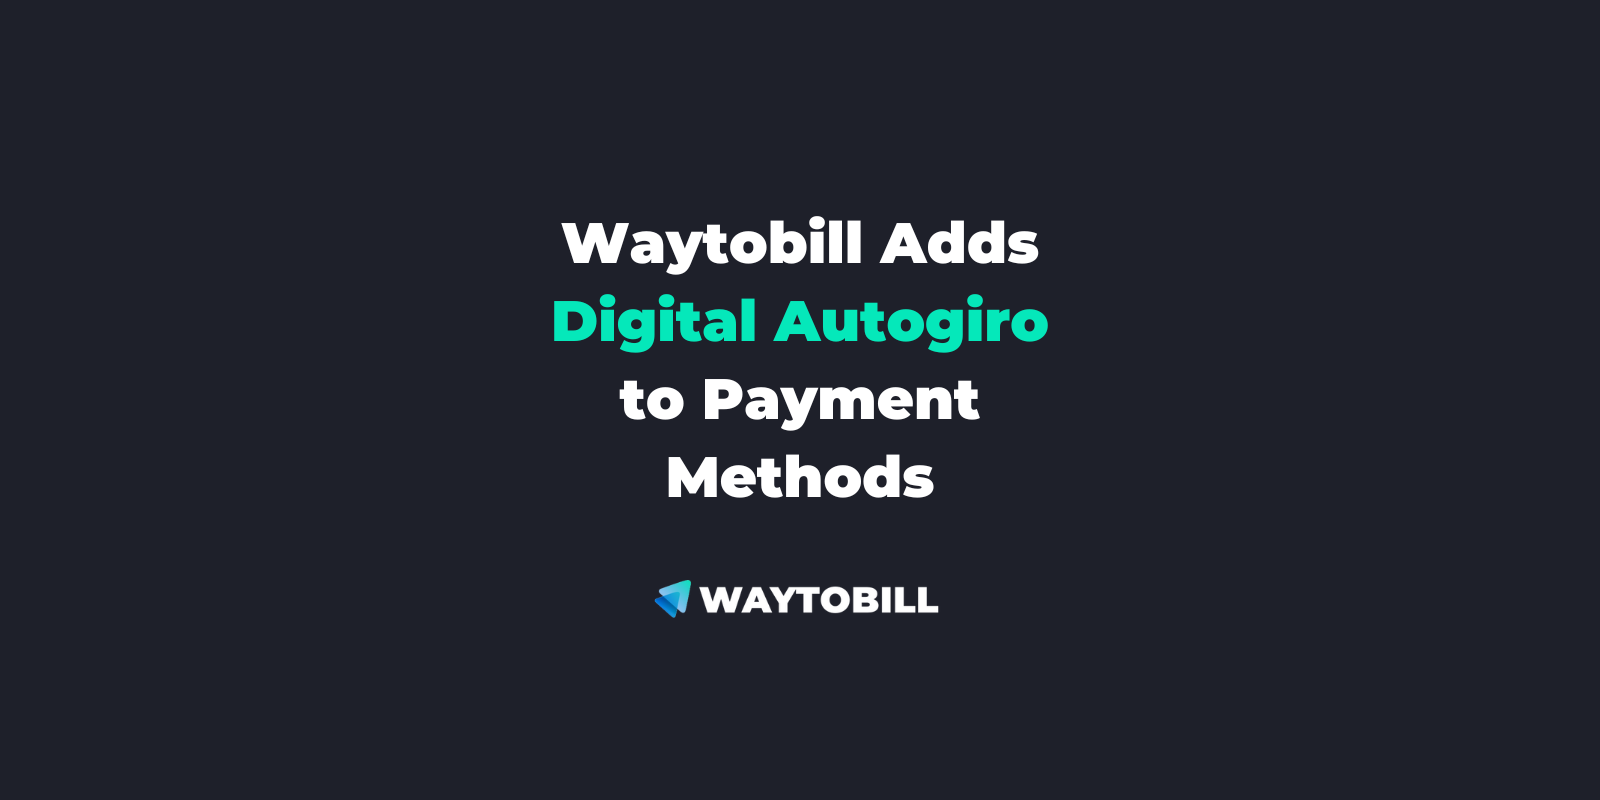 Waytobill adds Digital Autogiro as a Payment Option to its Checkout